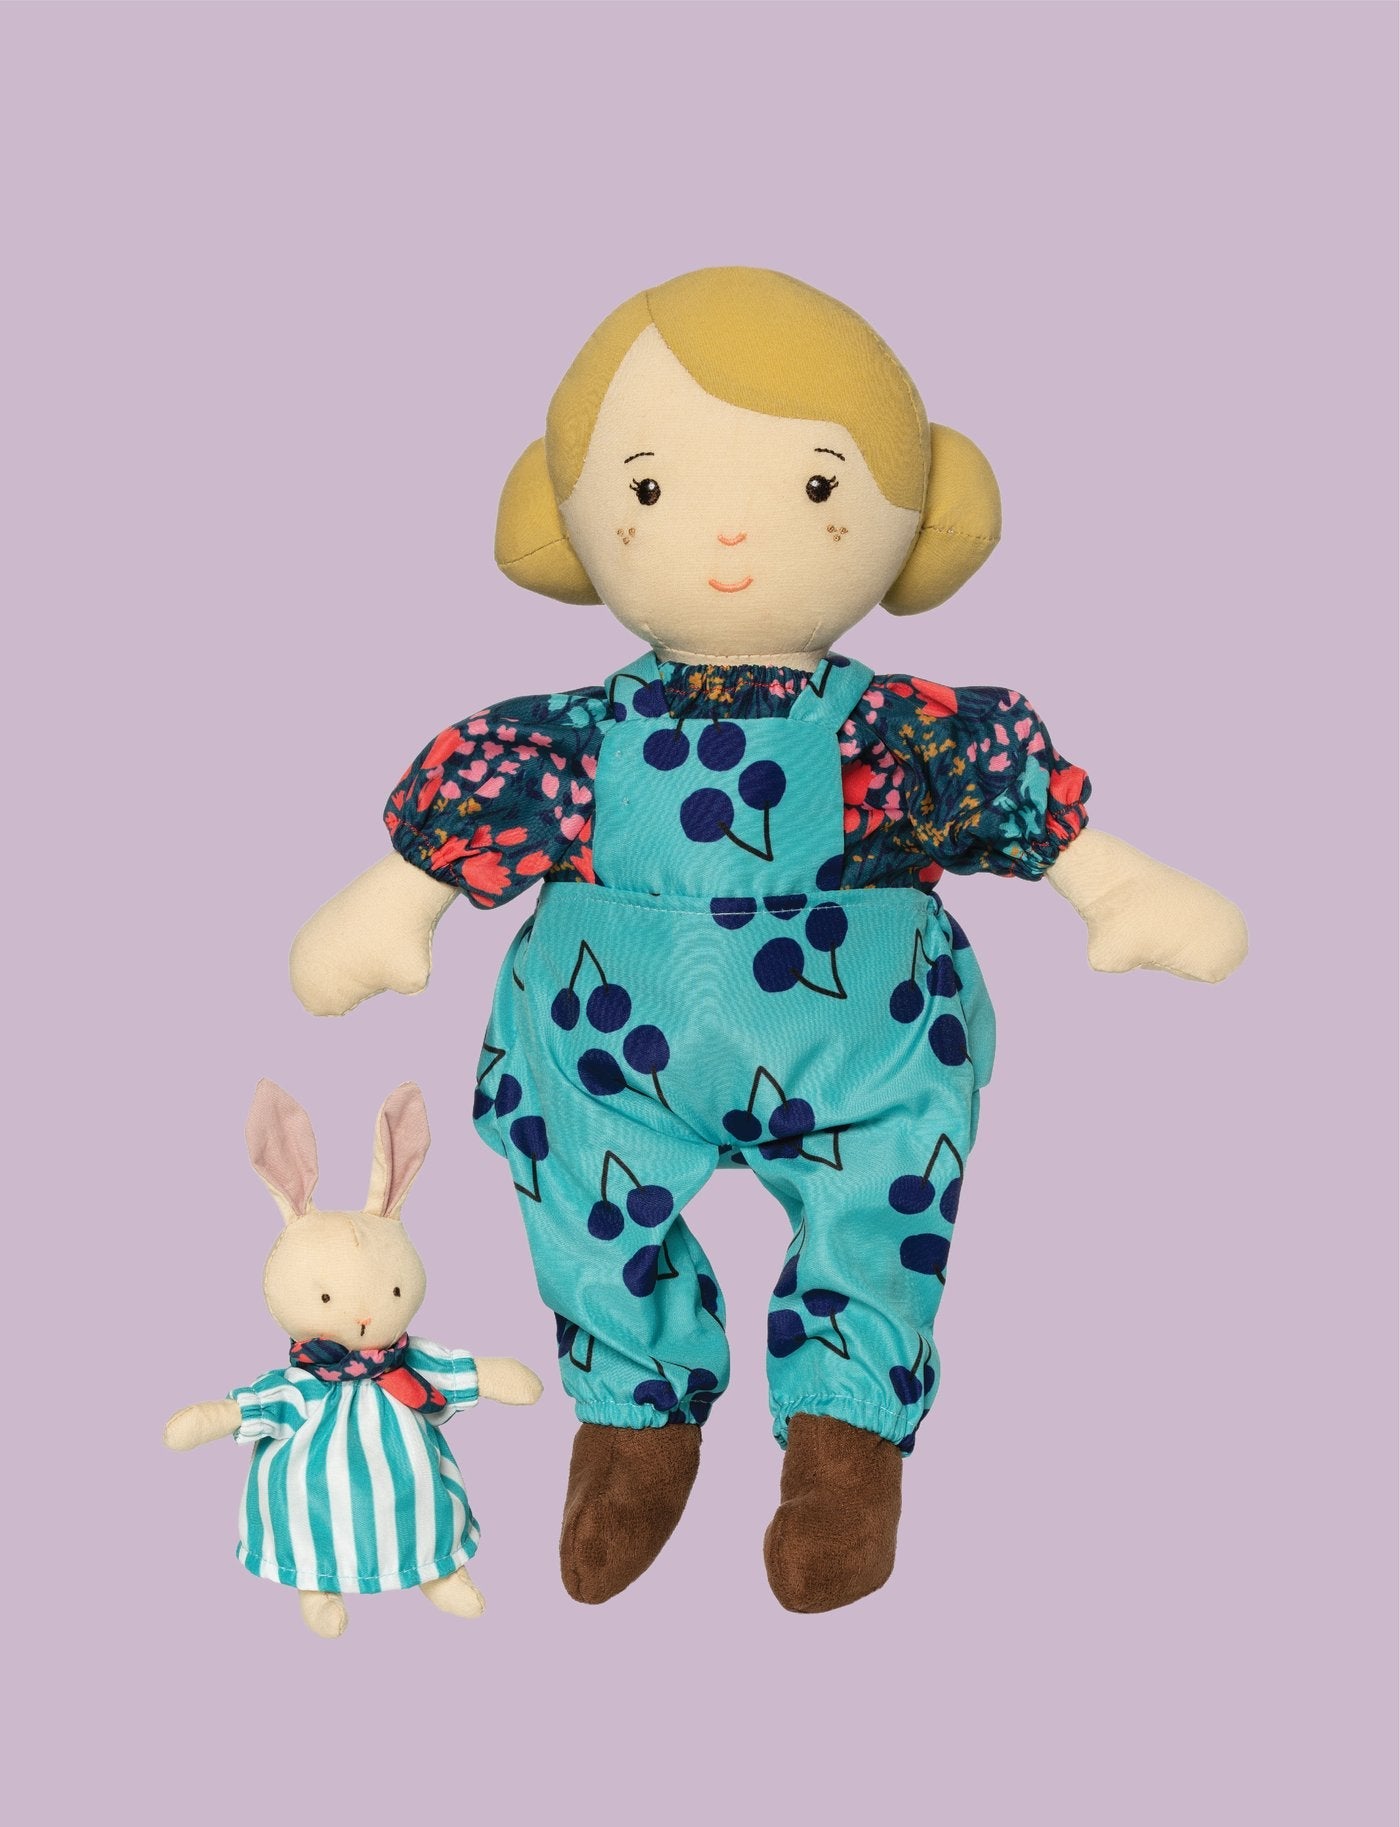 Manhattan Toy Playdate Friends Ollie with Bunny - ANB Baby -$20 - $50